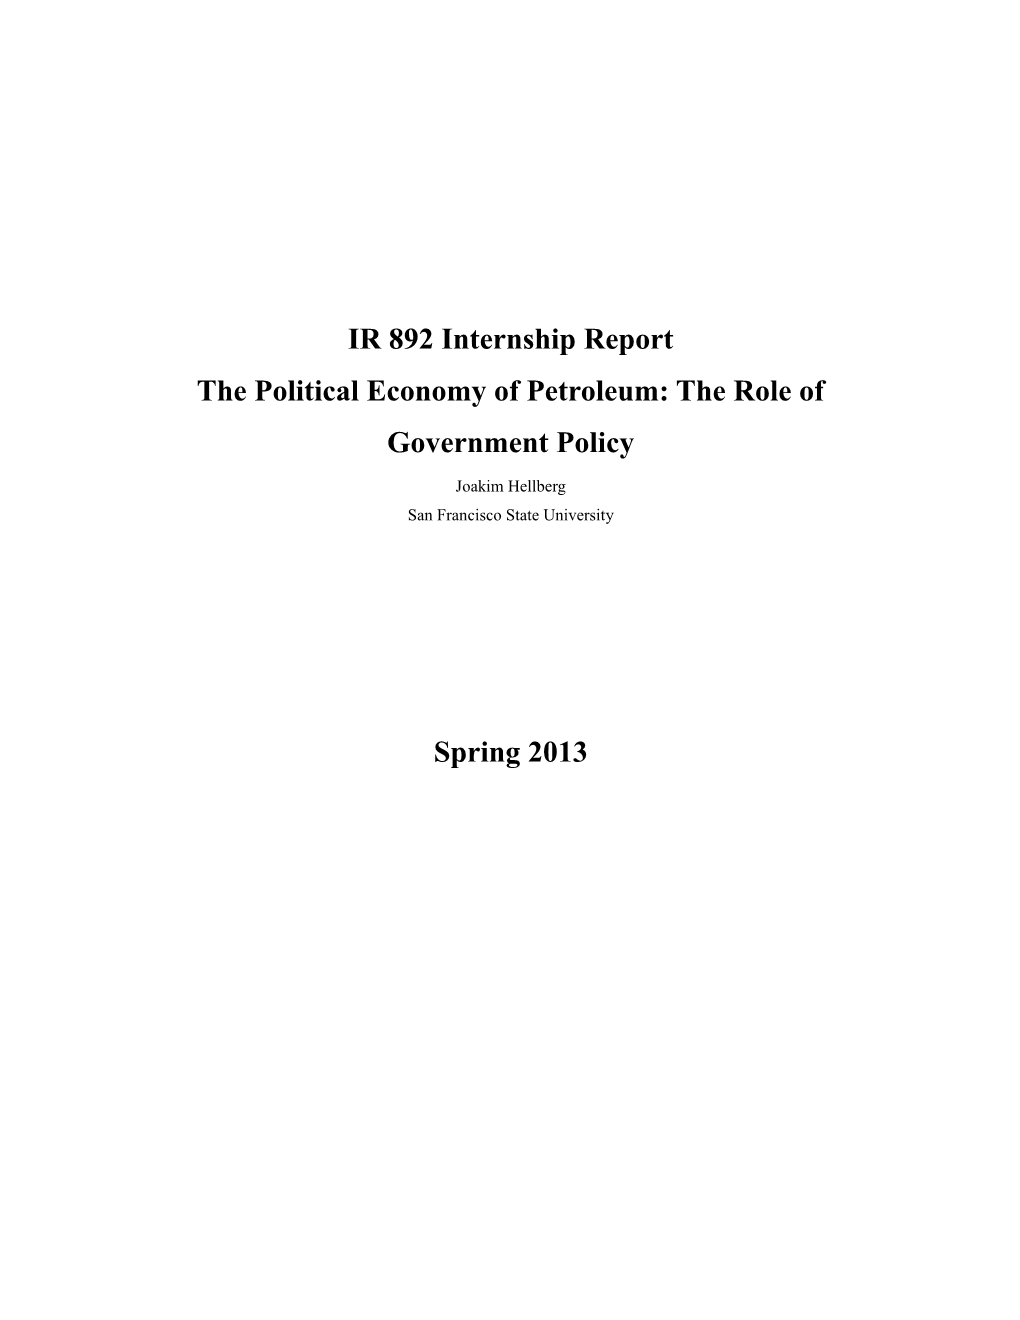 IR 892 Internship Report the Political Economy of Petroleum: the Role of Government Policy